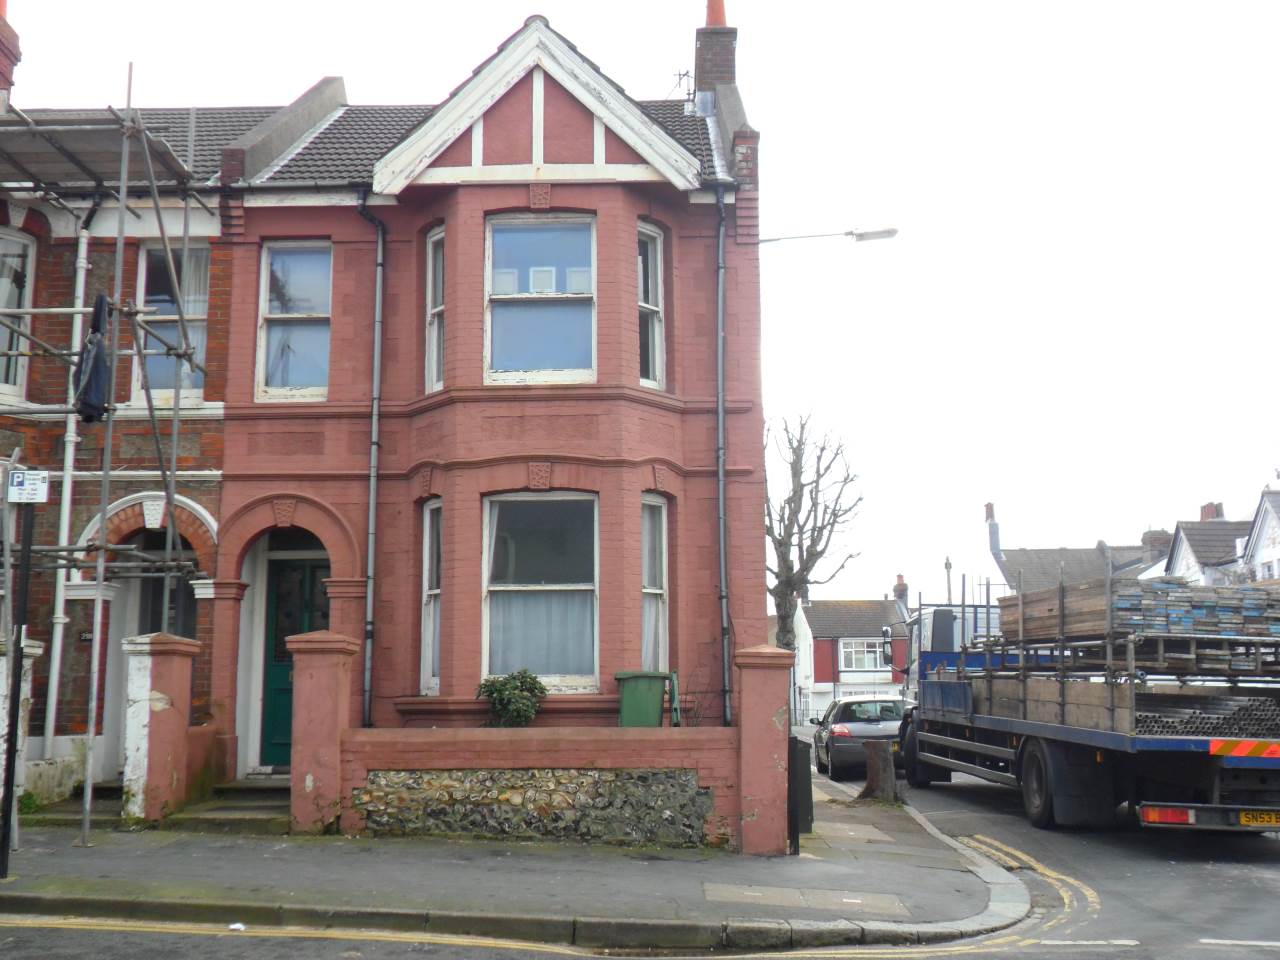 4 bed house to rent in Queen's Park Road, Brighton, BN2 